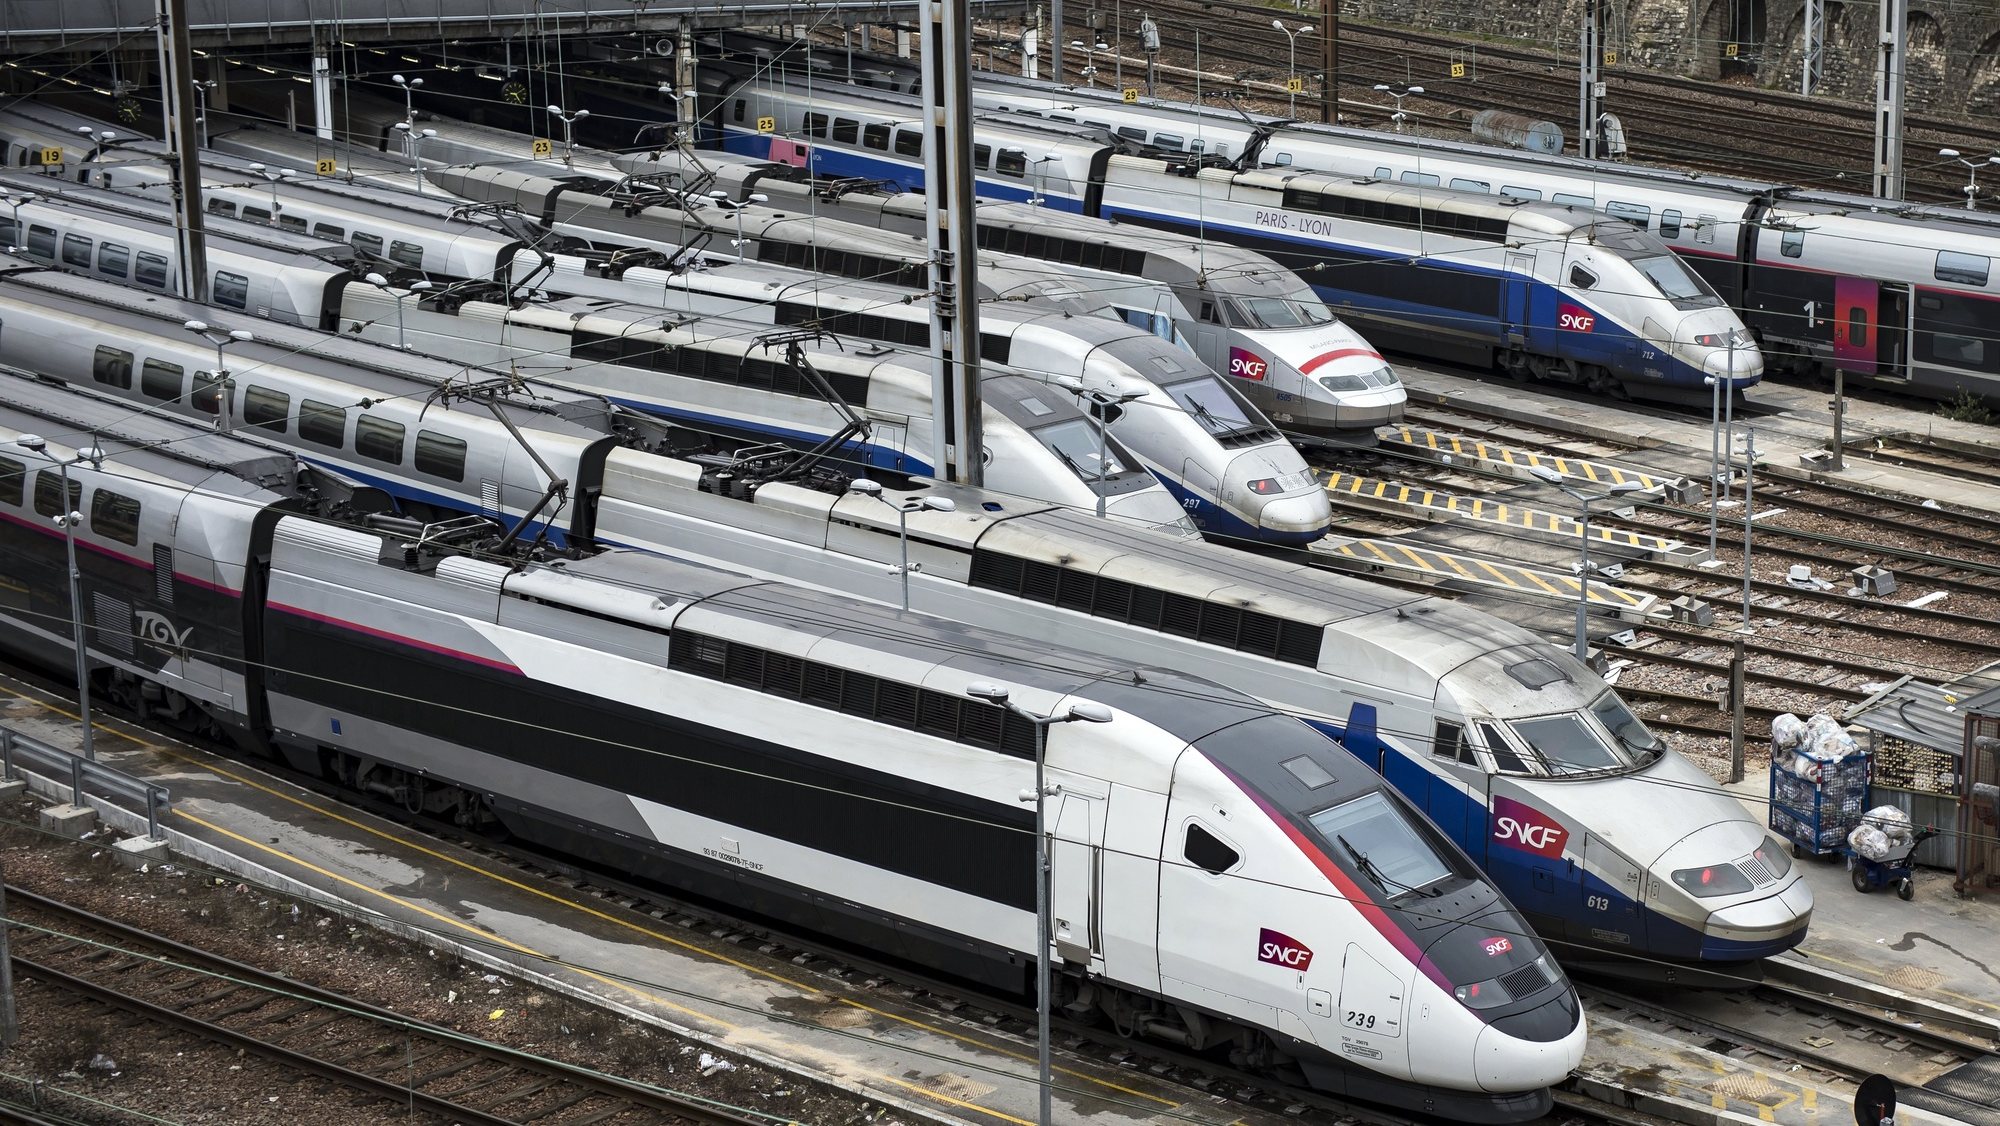 epa06619826 French TGV trains sit in the train depot of France&#039;s national rail network SNCF in Charenton-le-pont, during a nation-wide strike day affecting public transport, namely SNCF train travel, outside Paris, France, 22 March 2018. A national strike day was called by public sector workers and labor unions to defend labor rights and pensions.  EPA/IAN LANGSDON